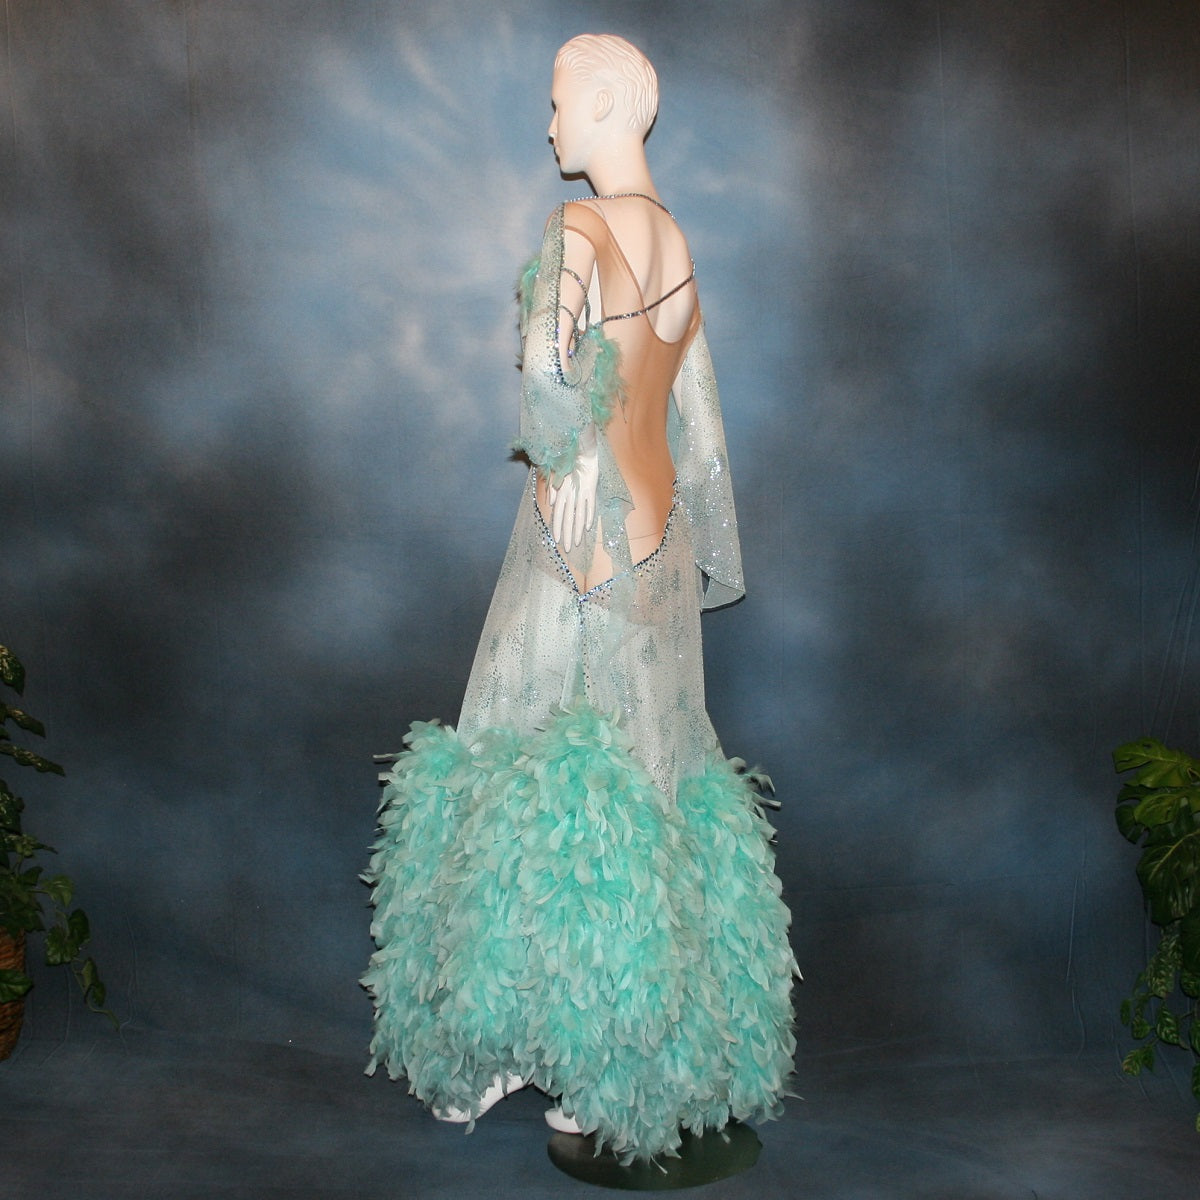 Crystal's Creations side view of Aqua blue ballroom dress created in gorgeous aqua blue glitter sheer mesh overlaid on a nude illusion base has lots of gorgeous aqua chandelle feathers, embellished with aquamarine Swarovski rhinestone work. This ballroom dress also features delicate Swarovski embellished strap detailing.